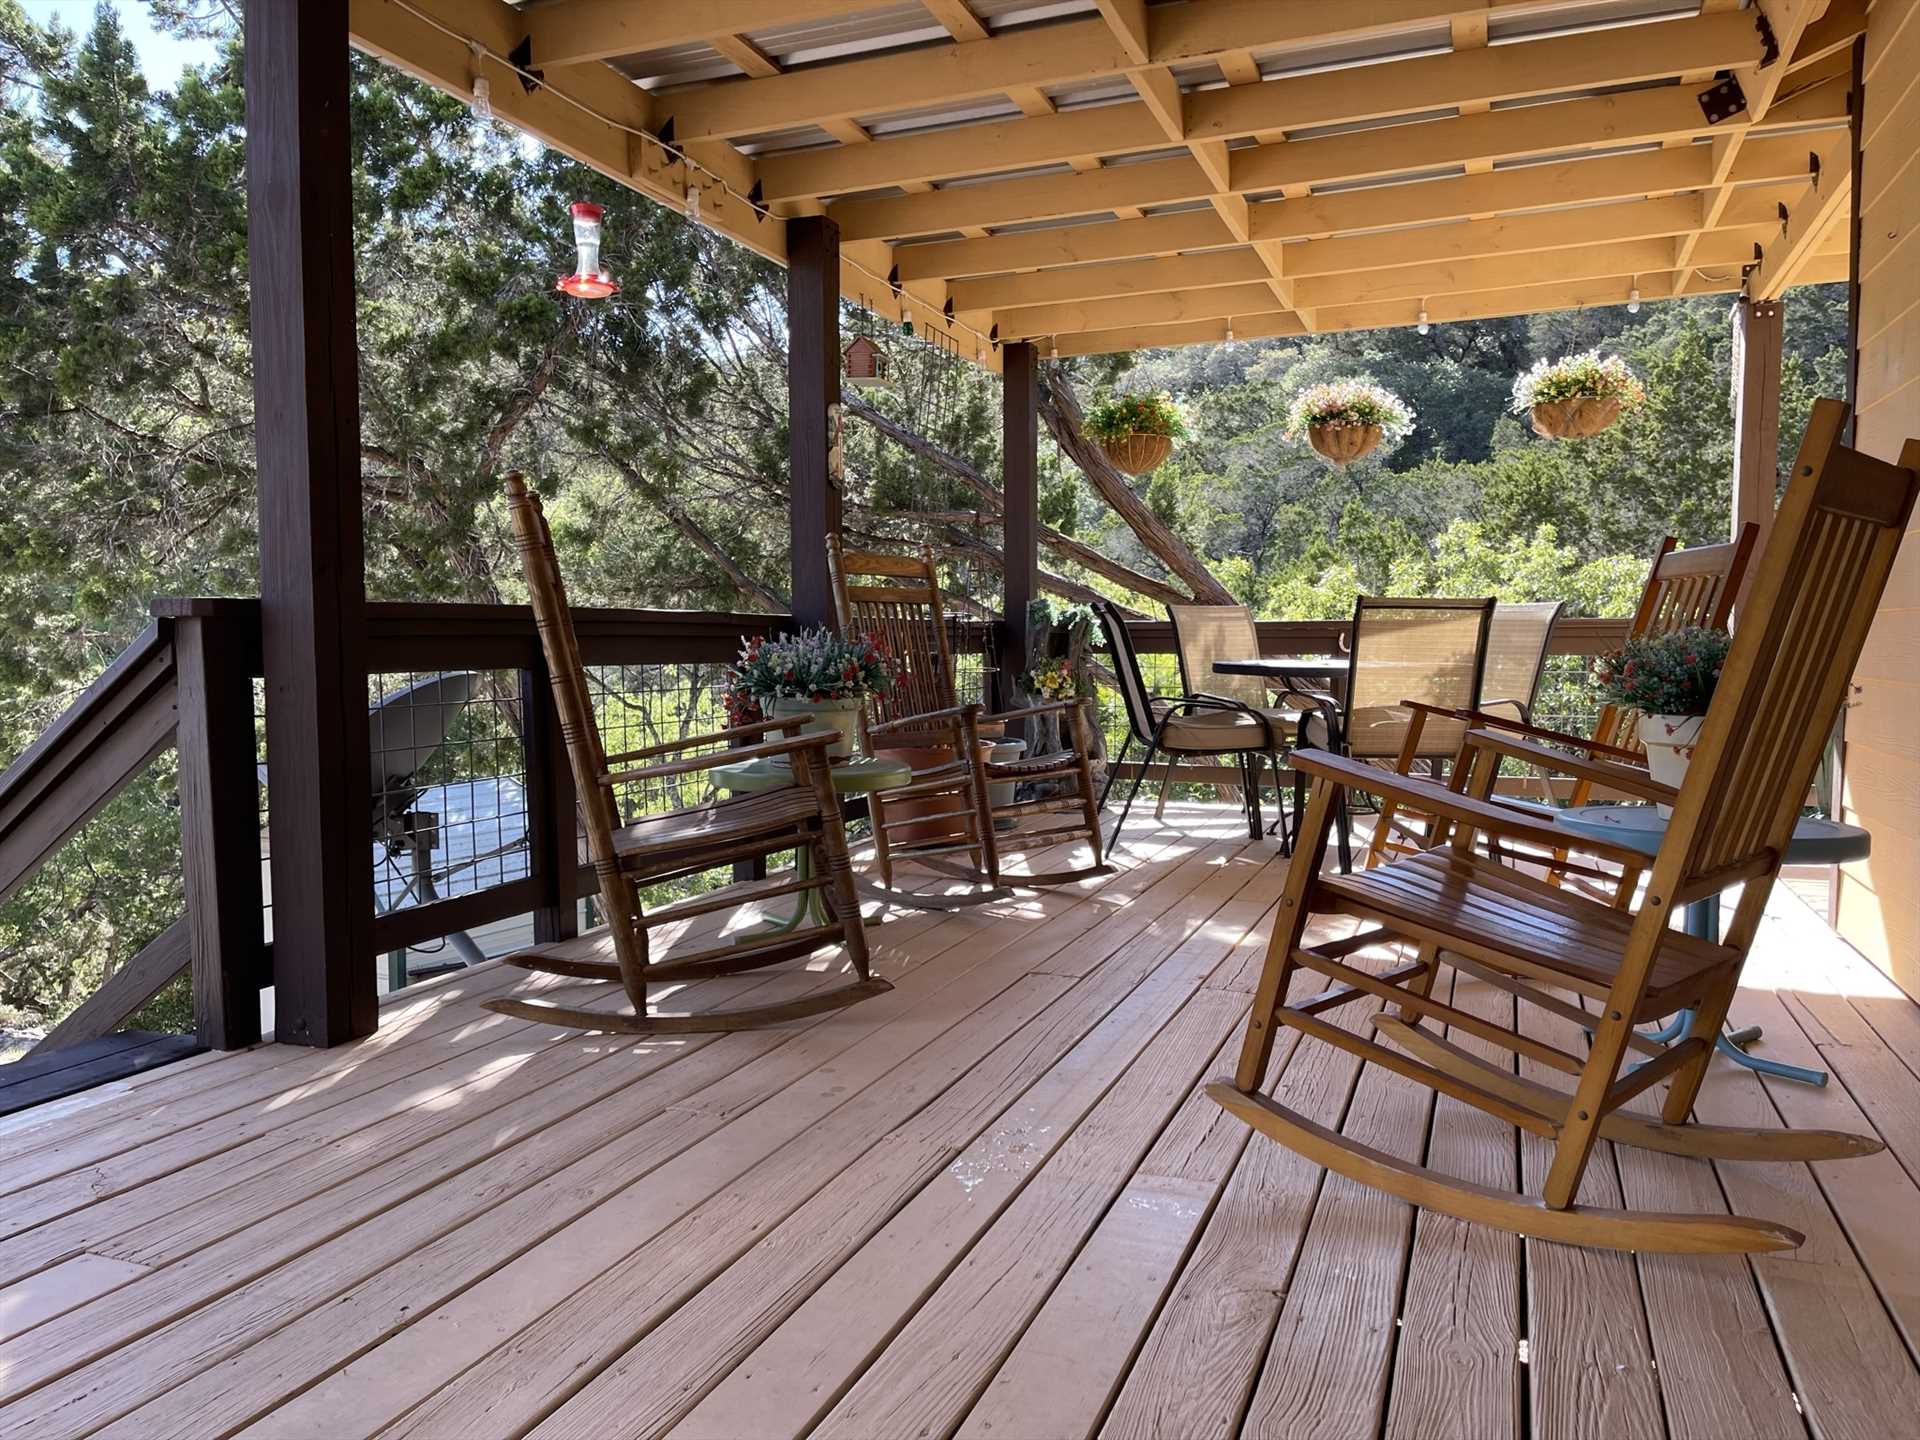                                                 Rocking chairs and an outdoor dining table on the deck make for a relaxing setting for conversation, a glass of wine, or a BBQ dinner for two.